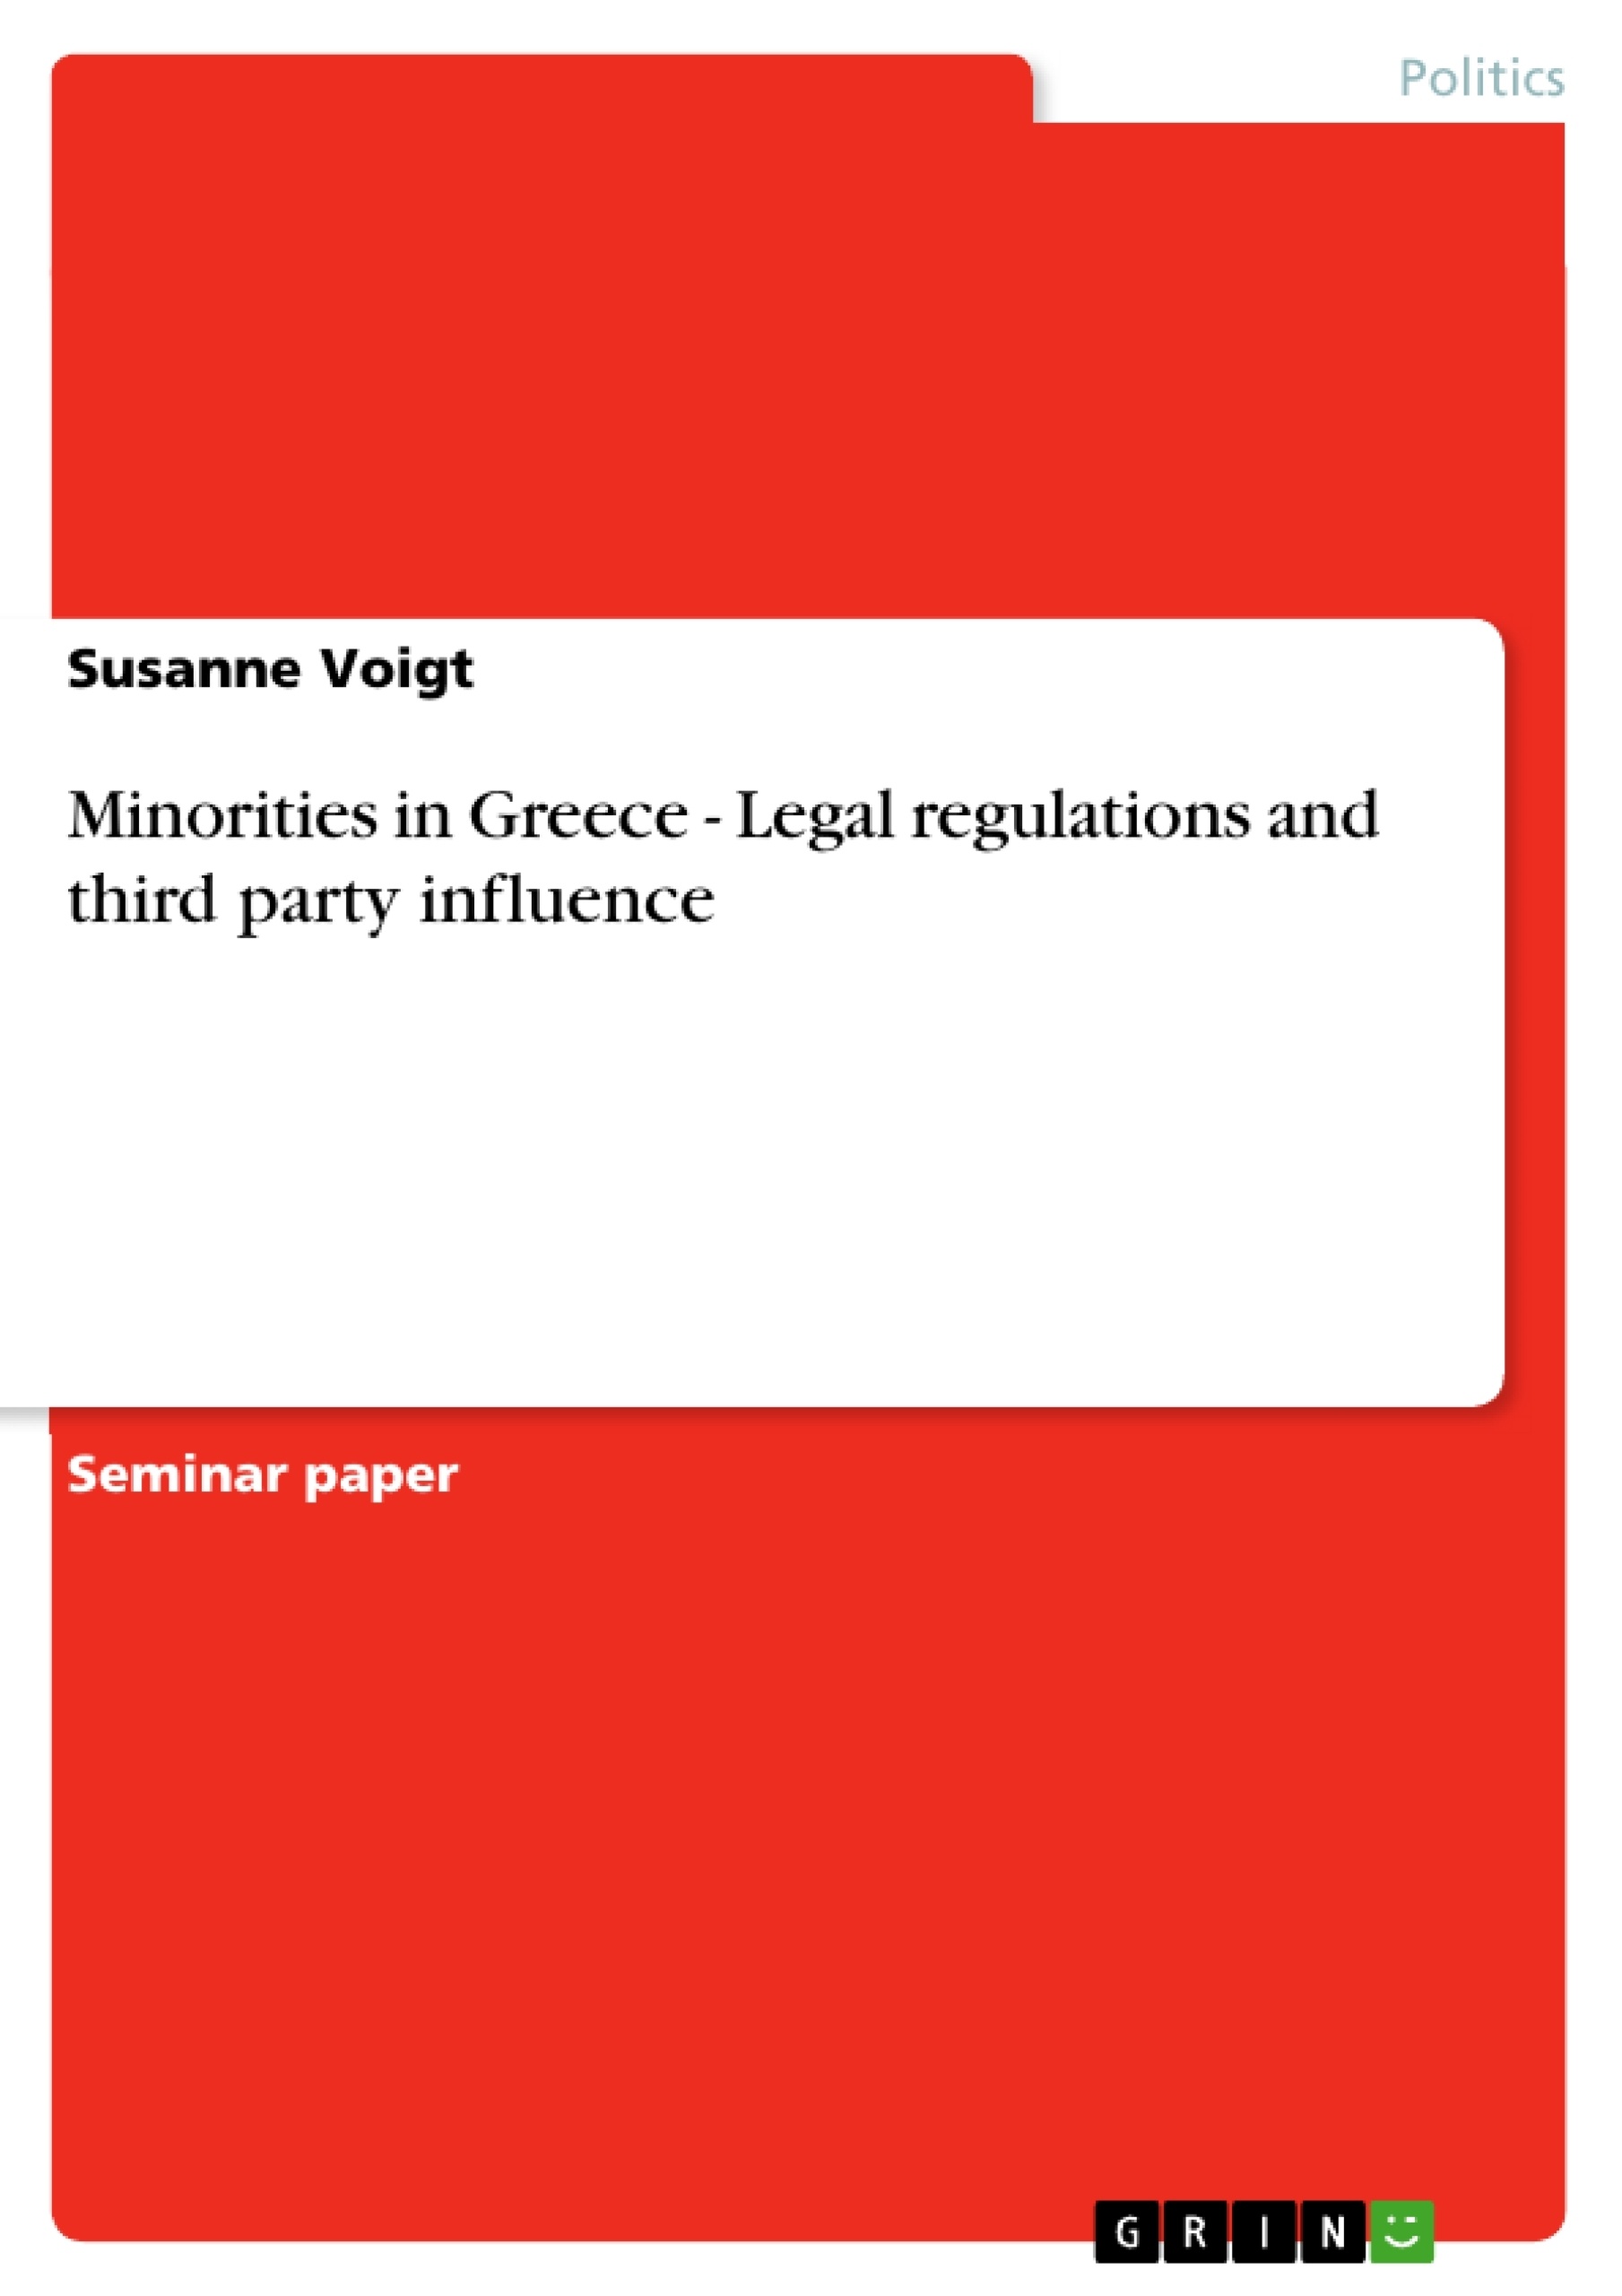 Titre: Minorities in Greece - Legal regulations and third party influence	